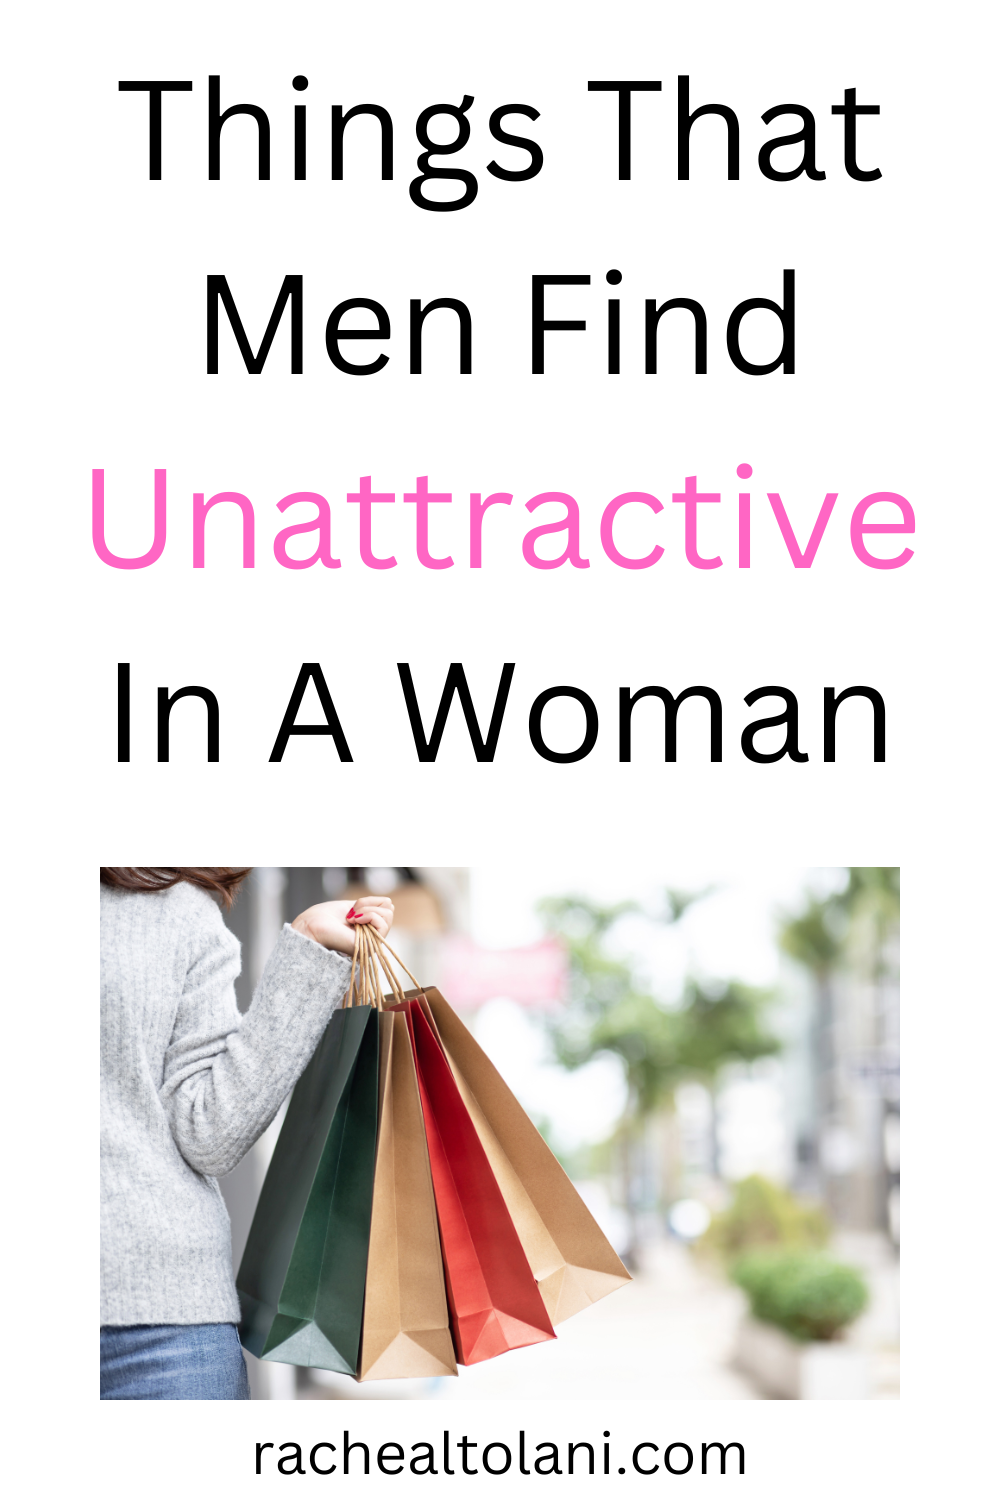 Things men find unattractive in a woman